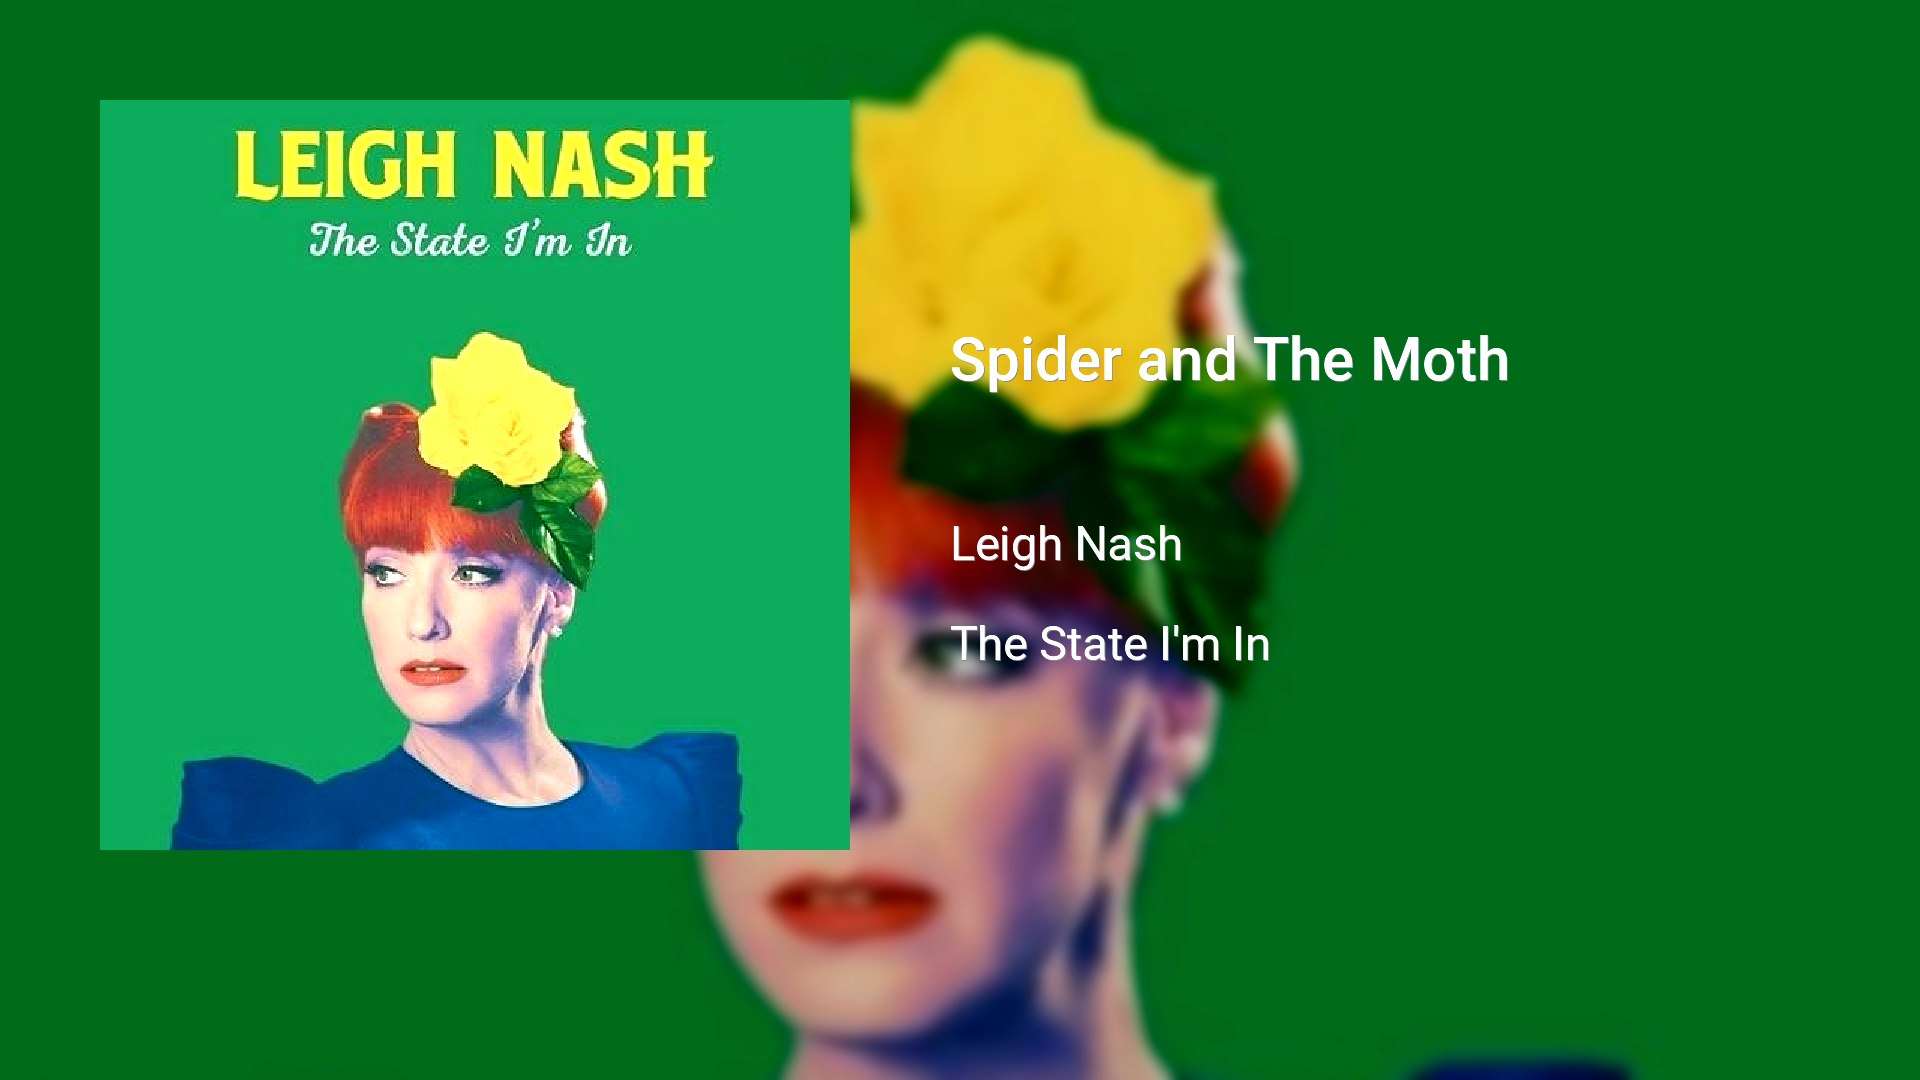 Leigh Nash - Spider and The Moth